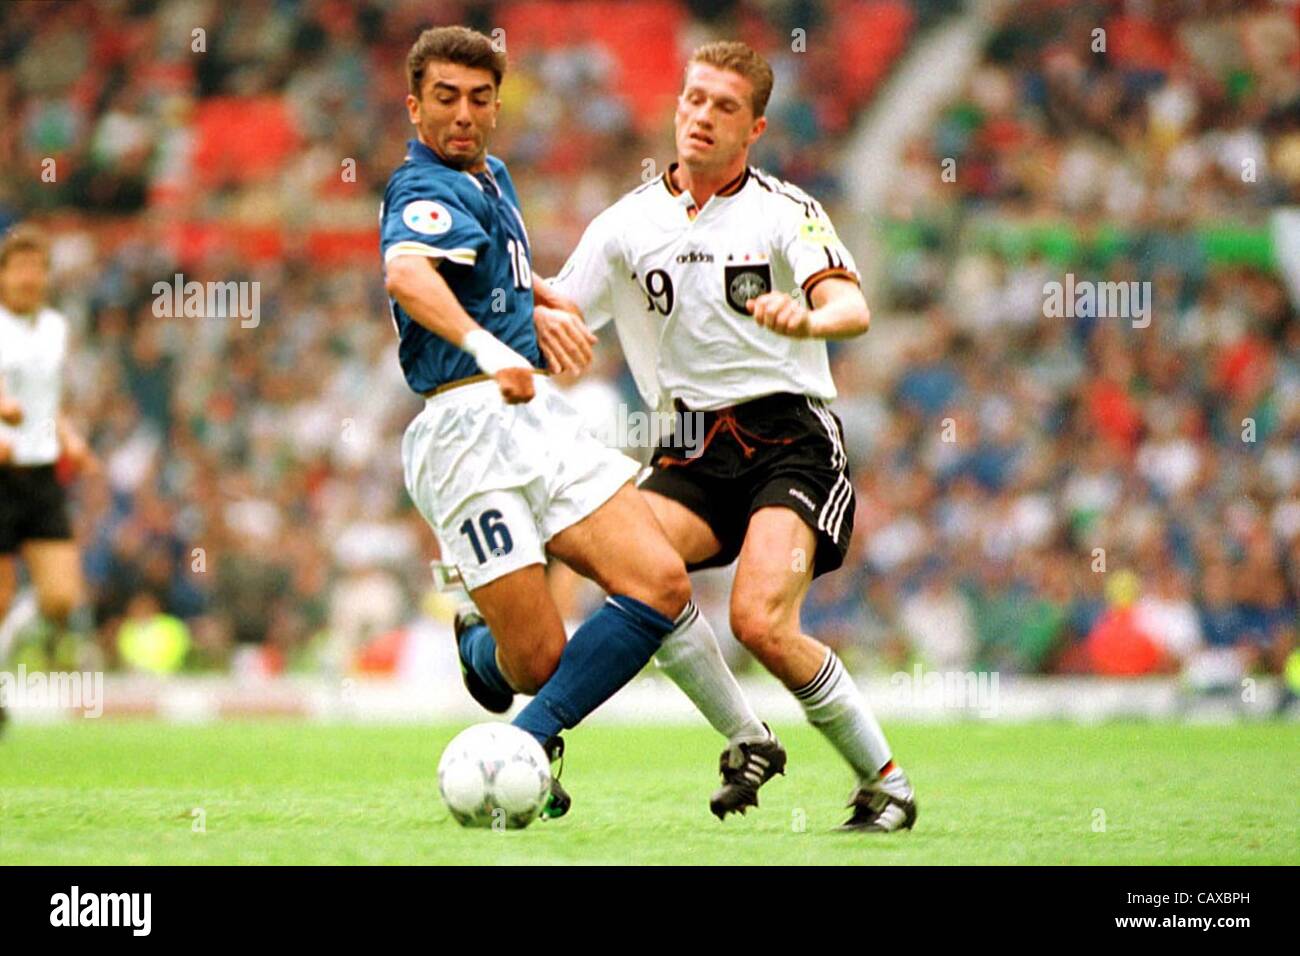 19.06.1996 Manchester, England. Thomas Strunz (Ger) challenged by Roberto Di Matteo (Ita); Germany - Italy 0:0,  Manchester Old Trafford stadium Stock Photo